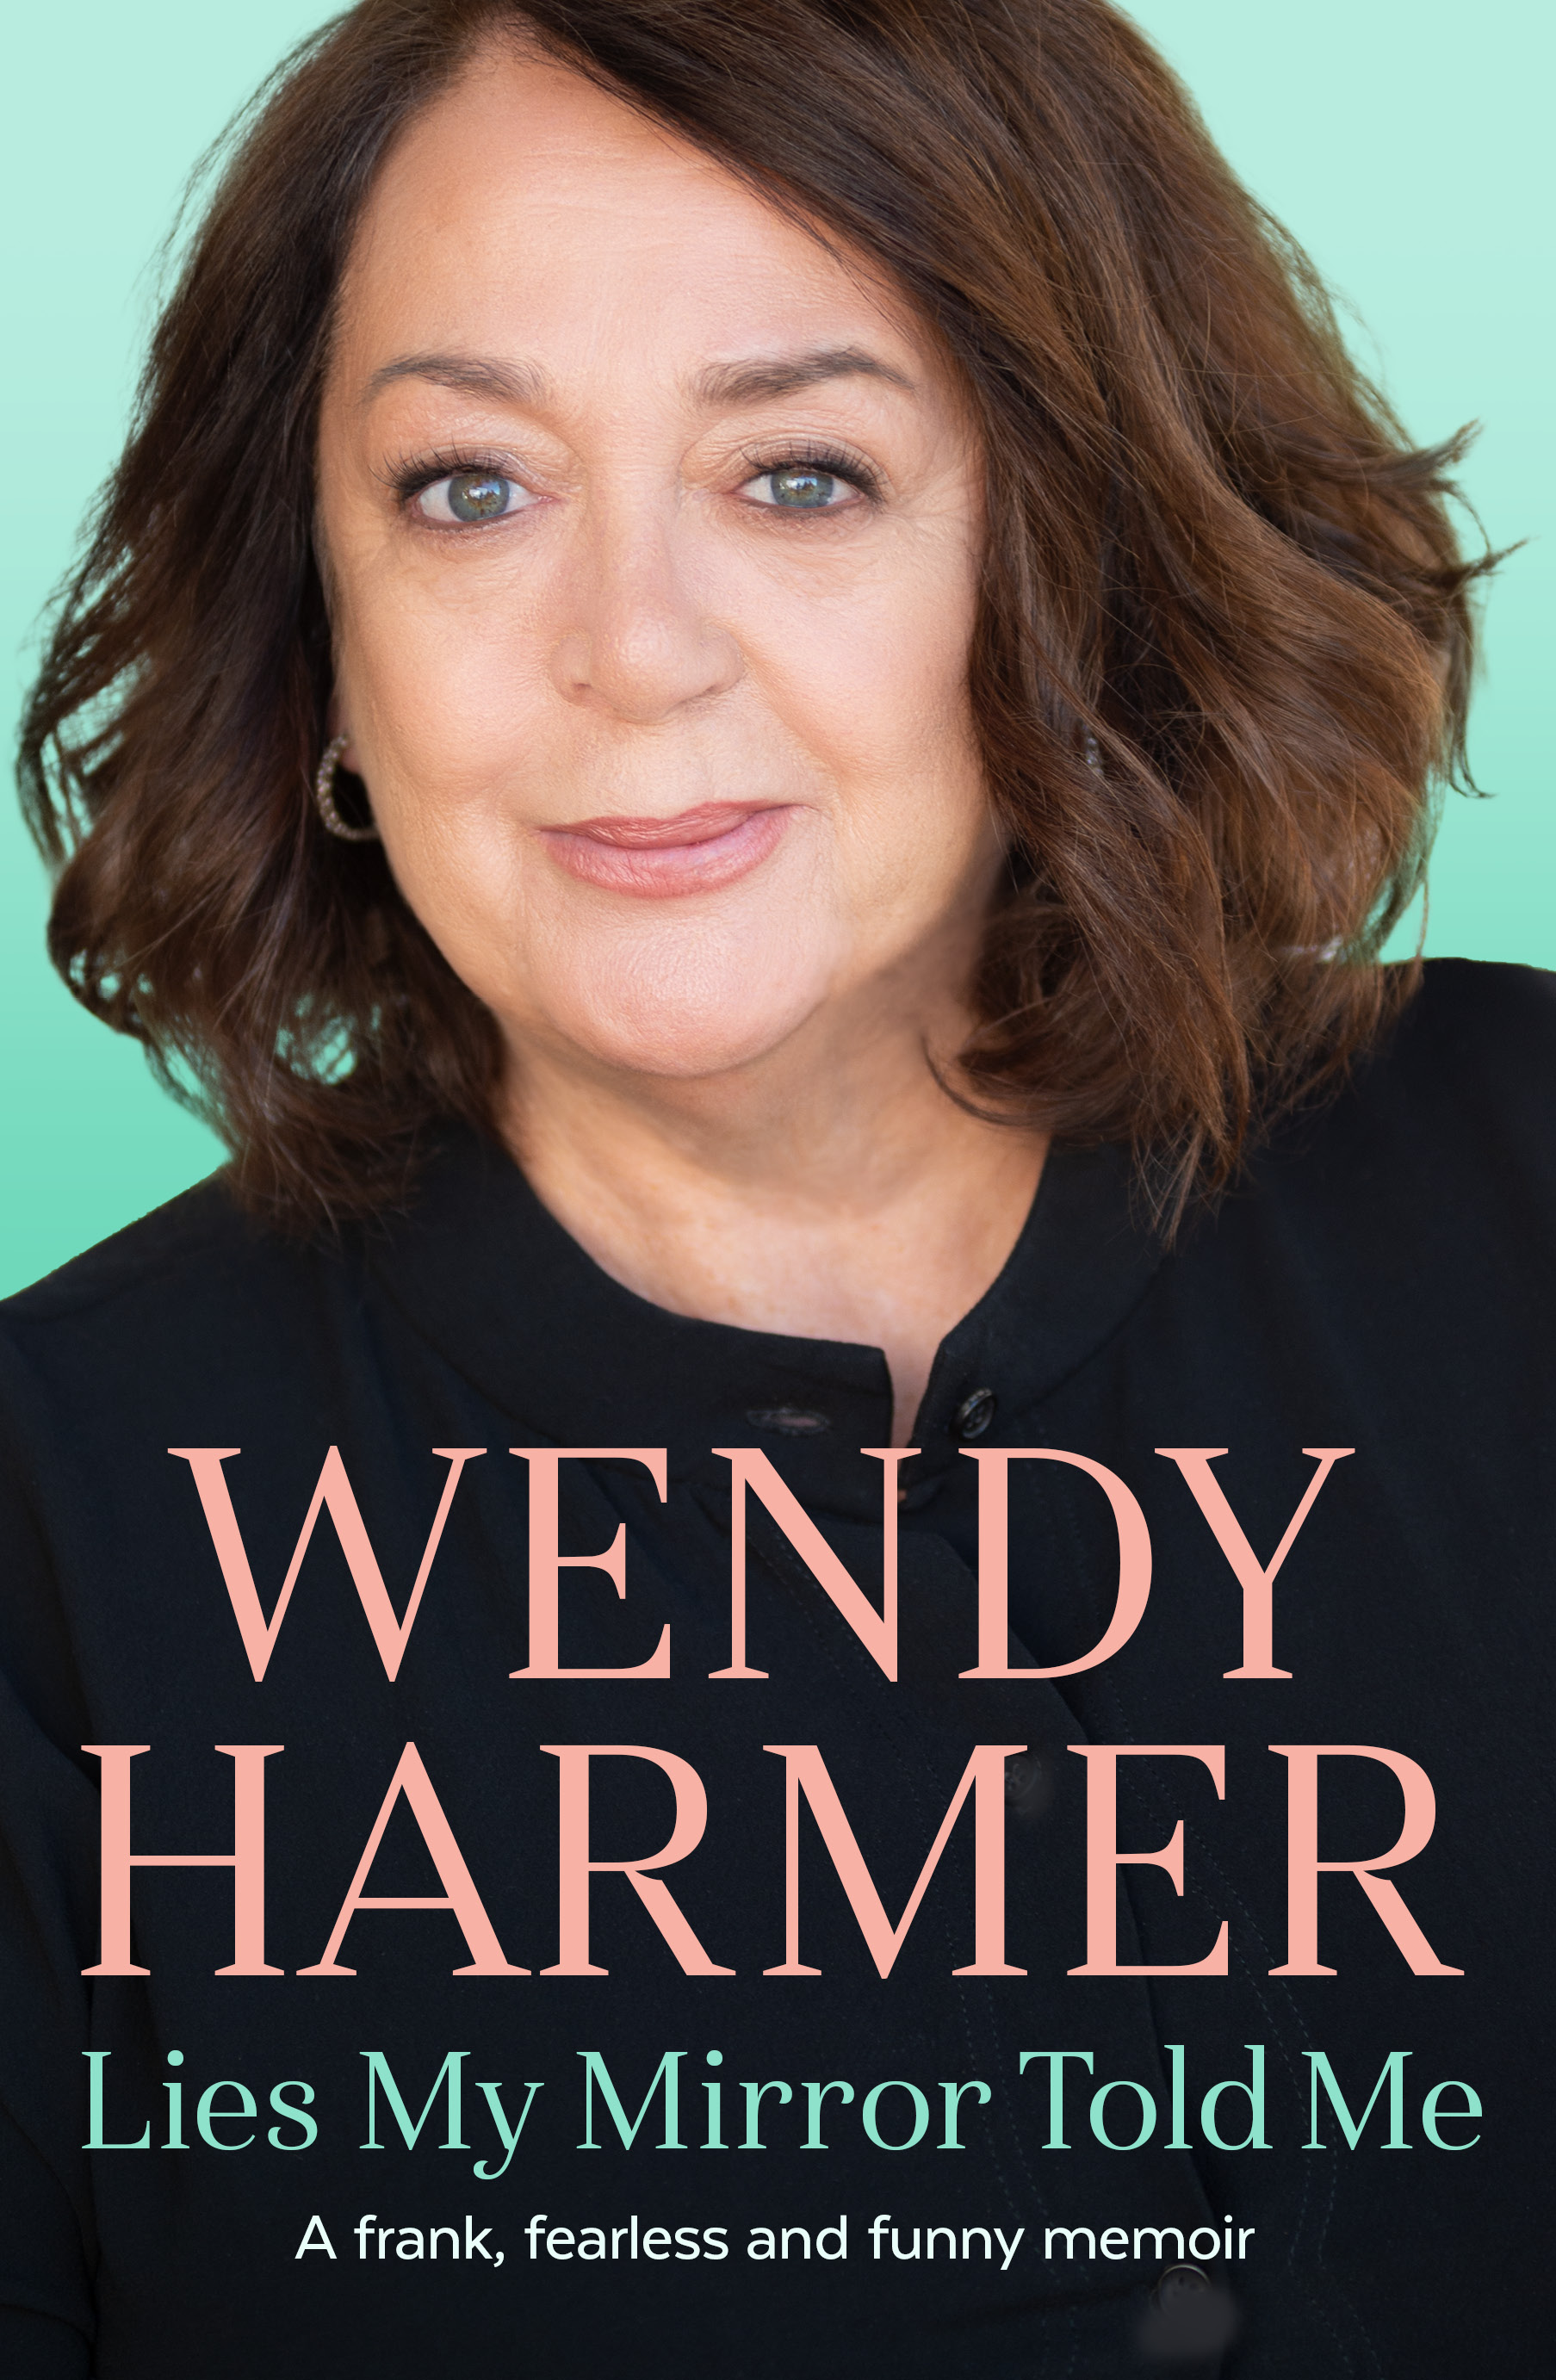 Book cover for 'Lies my mirror told me' by Wendy Harmer